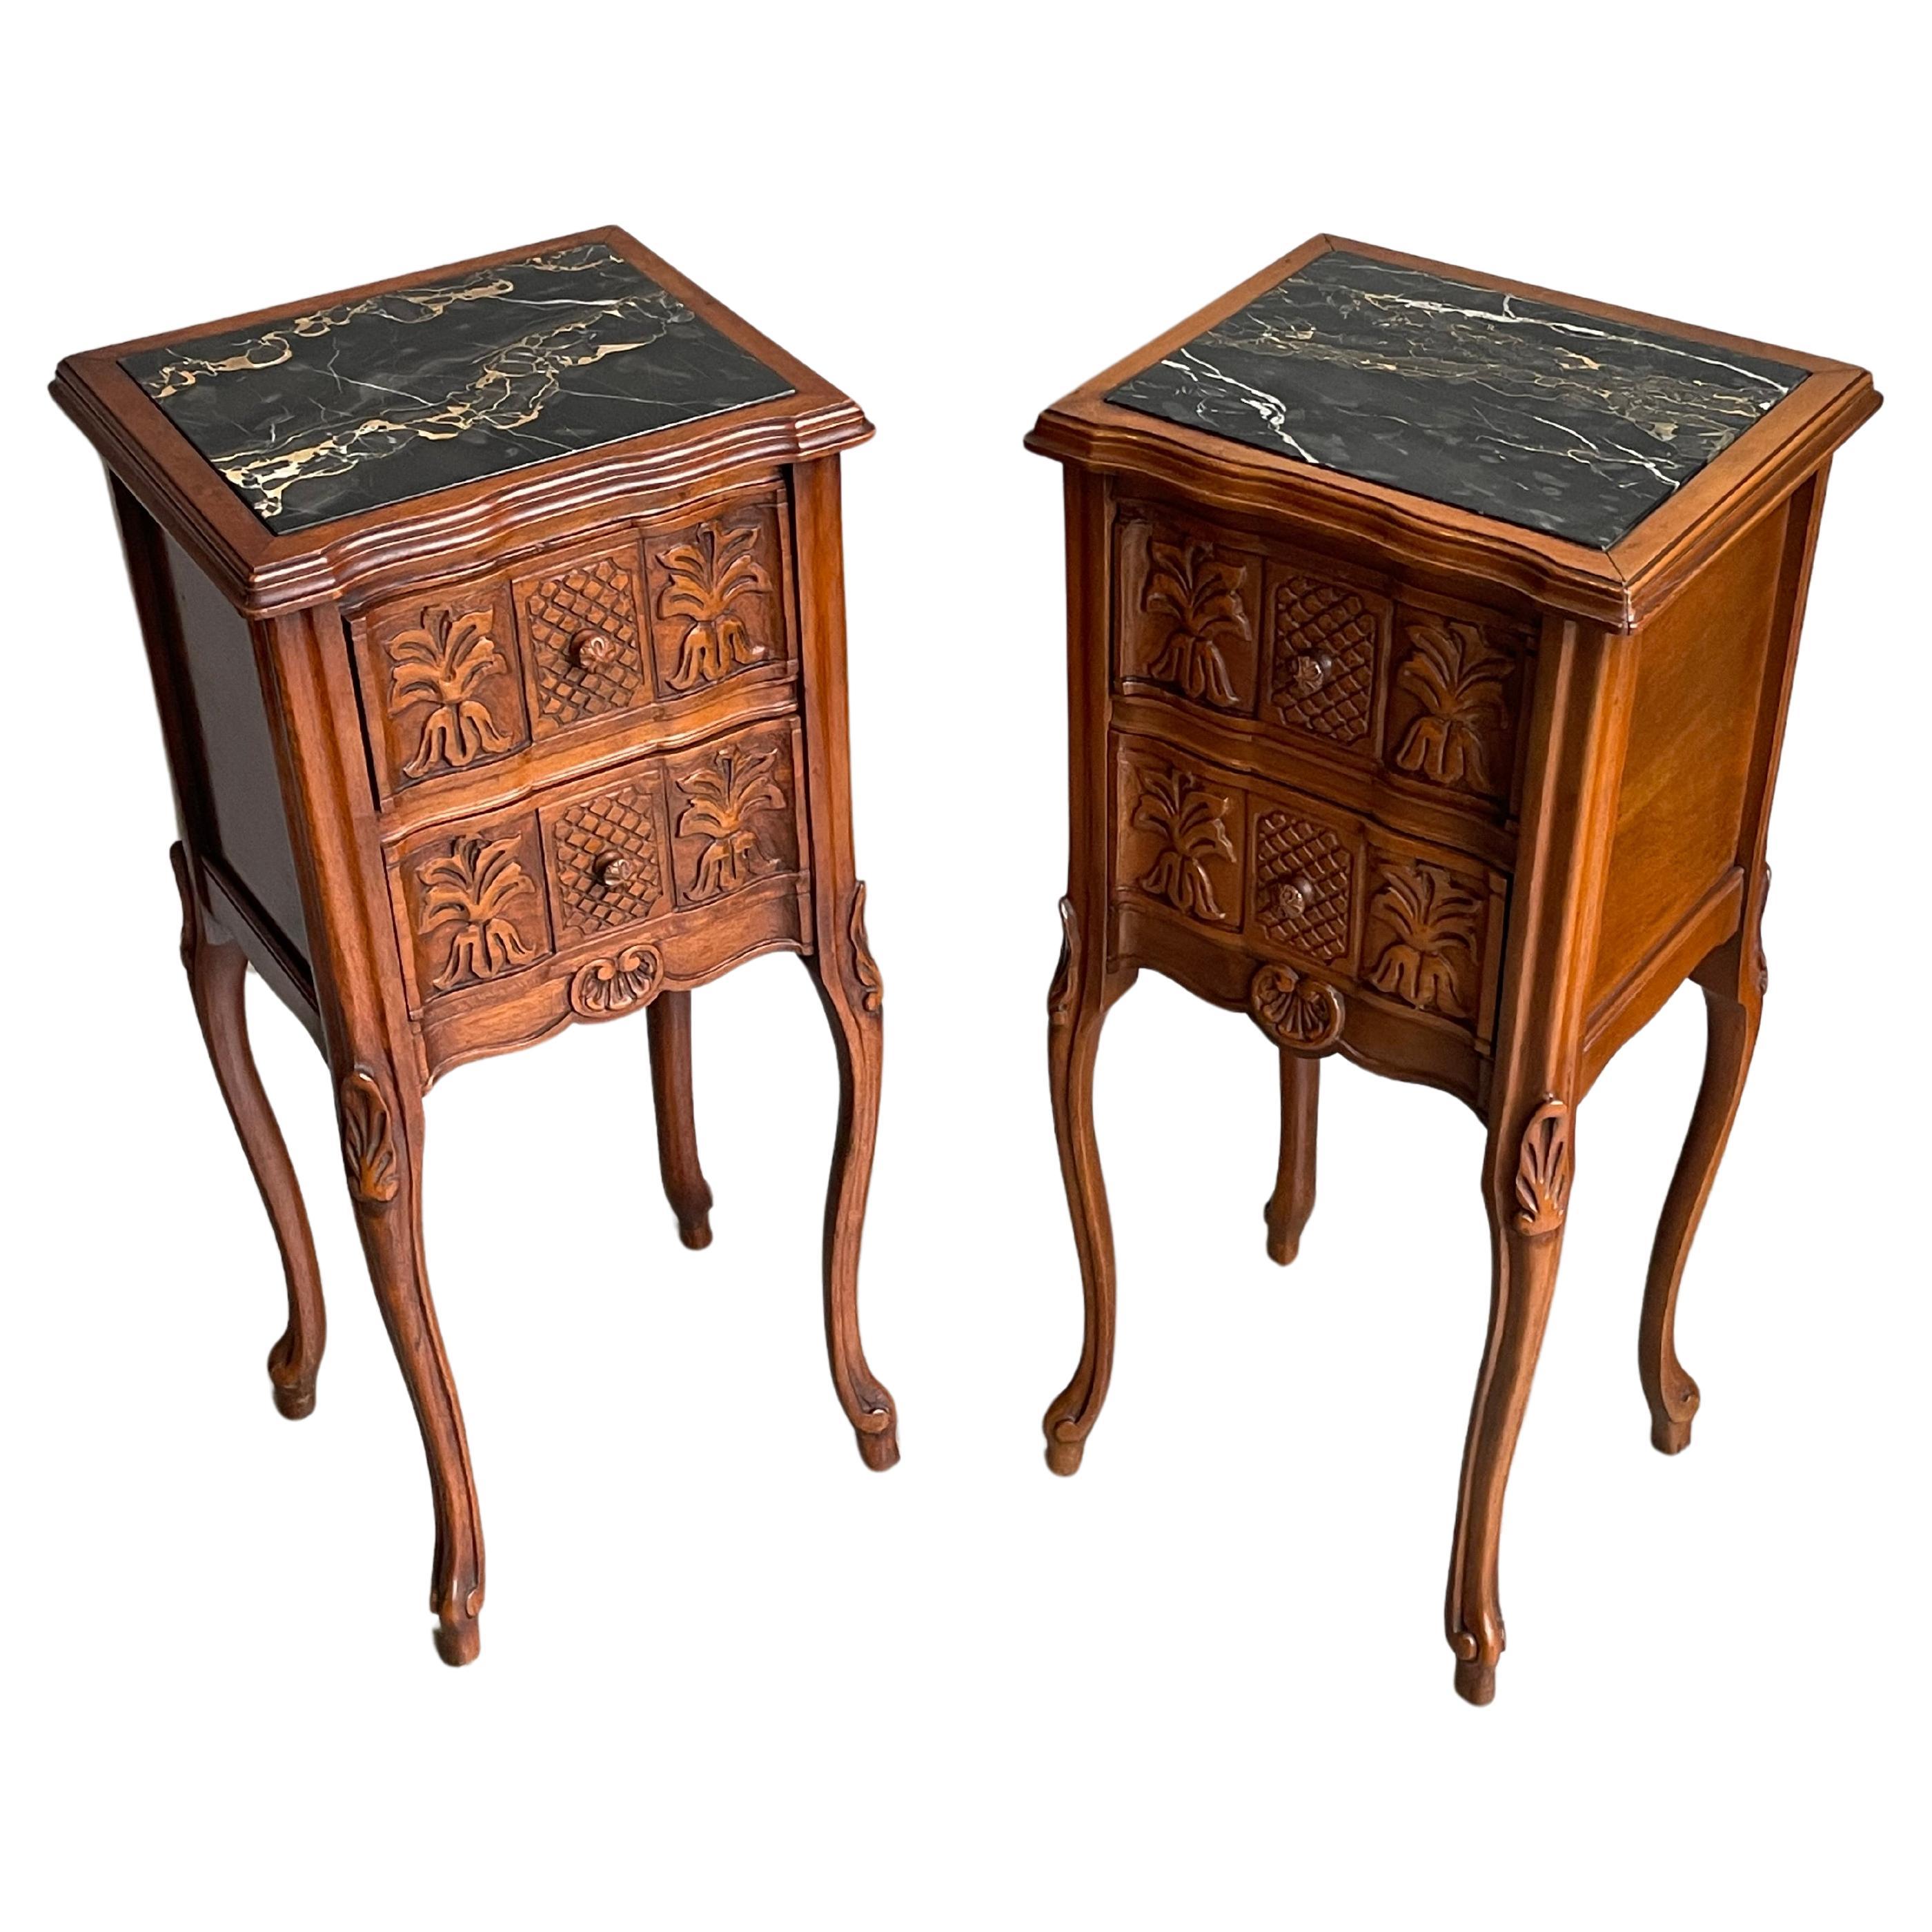 Antique Pair of Nutwood Bedside Cabinets / Nightstands with Stunning Marble Tops